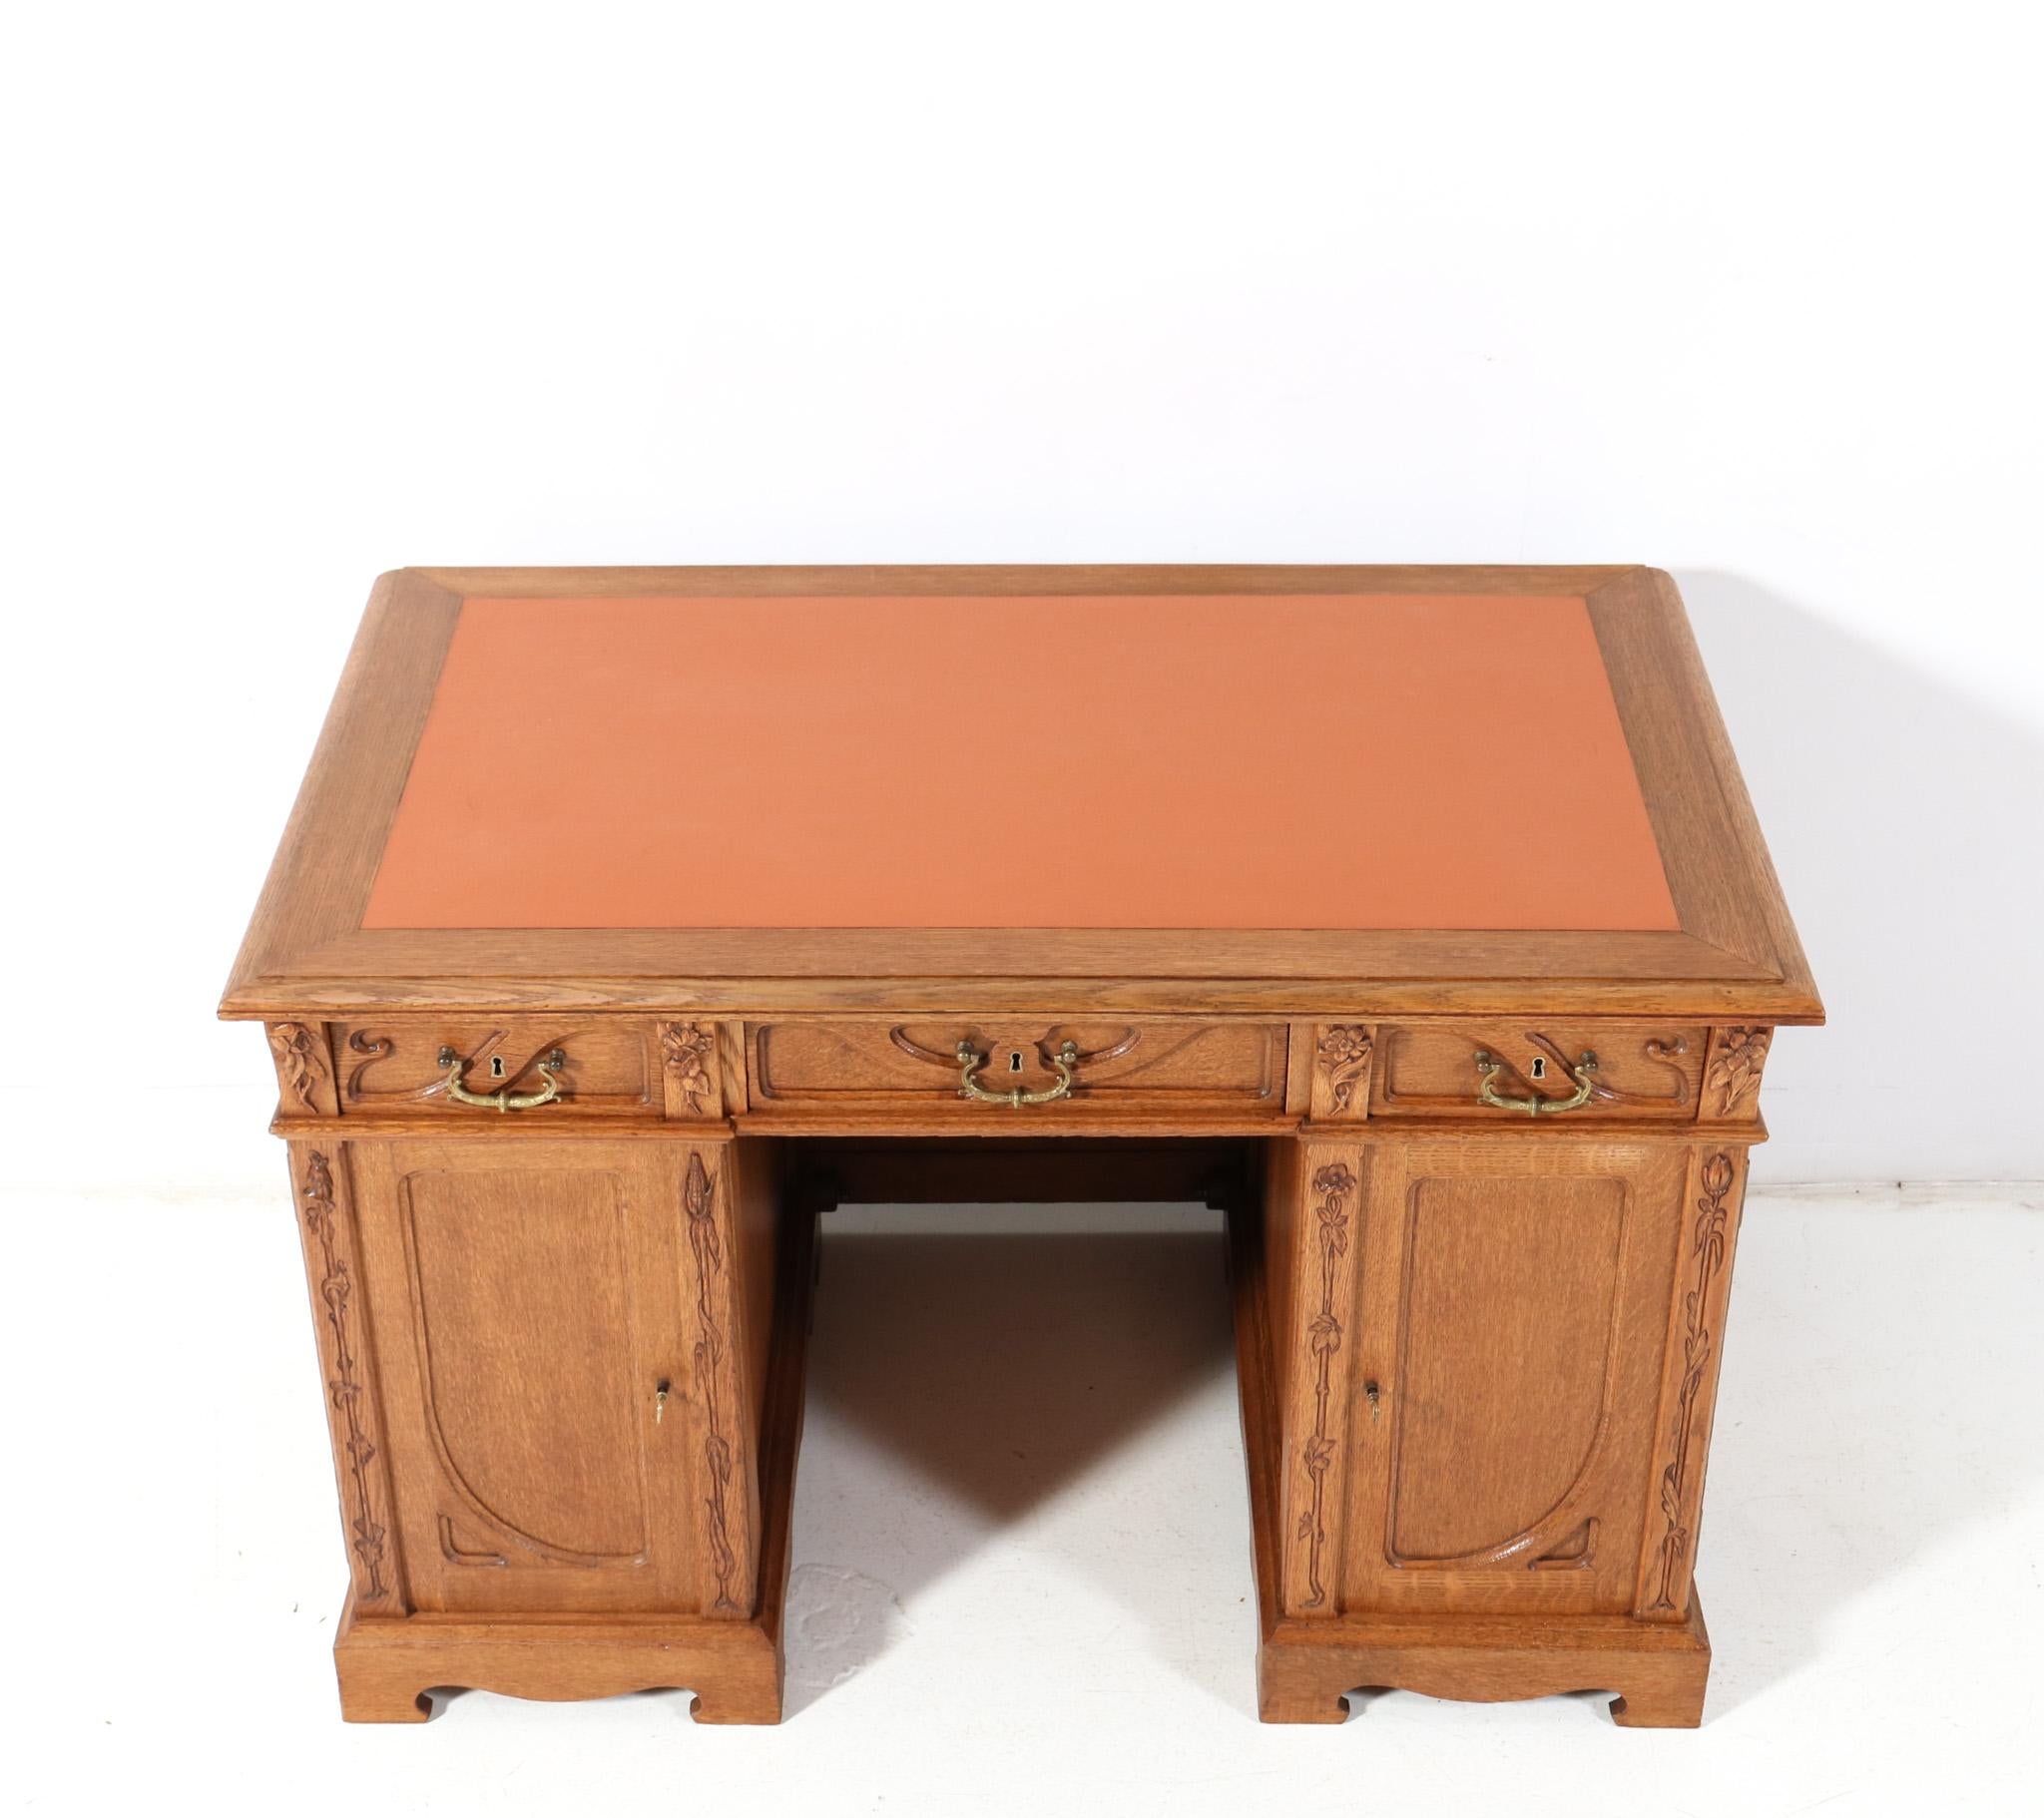 Magnificent and rare Art Nouveau pedestal desk.
Design by J.J. Terburg & Soon Arnhem.
Striking Dutch design from the 1900s.
Solid oak with hand-carved floral decorative elements at the front side.
The three drawers have the original patinated